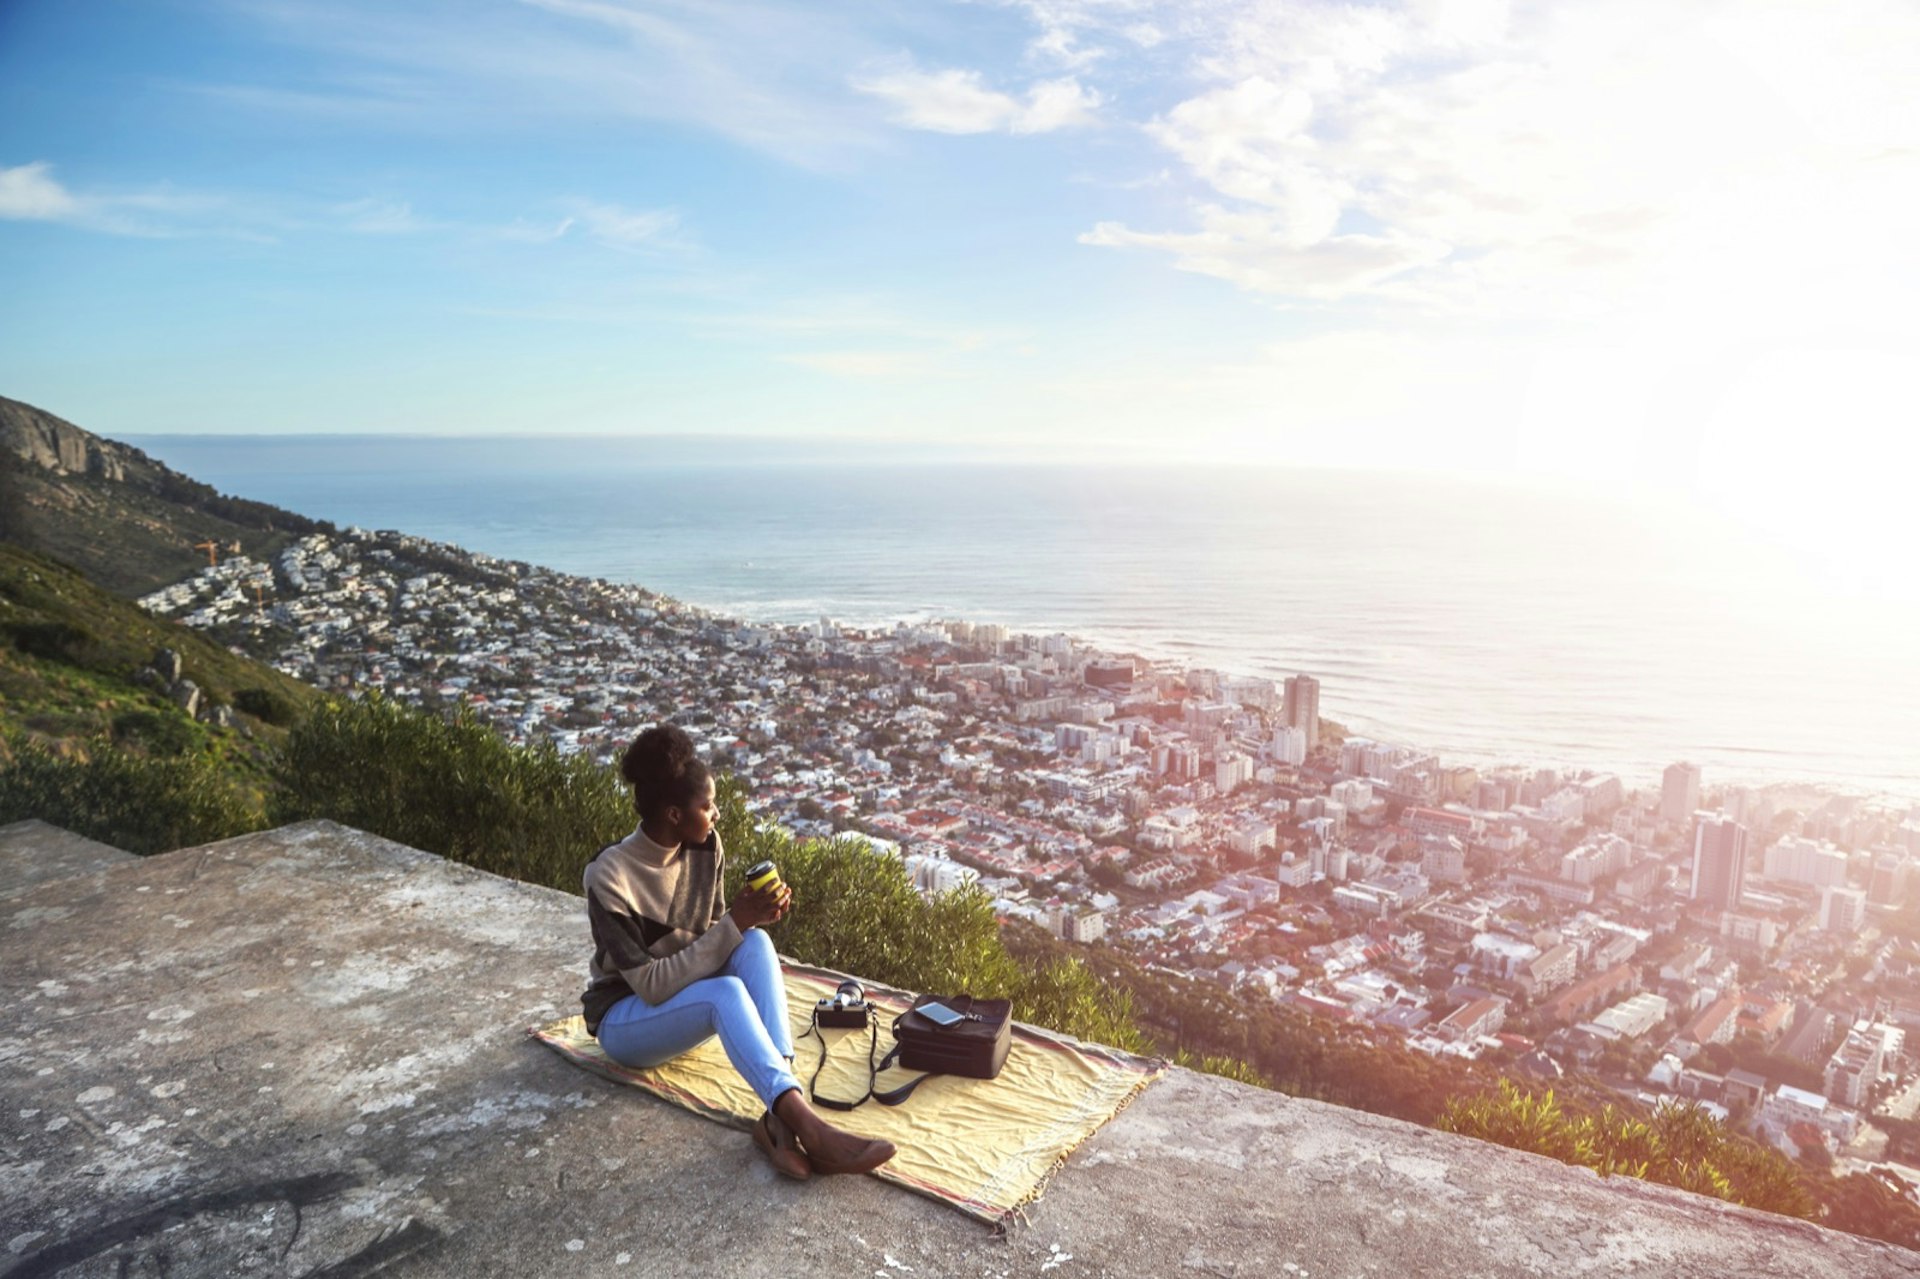 A woman sits on a yellow towel on a hill overlooking a large city on the coast; sacred spaces 